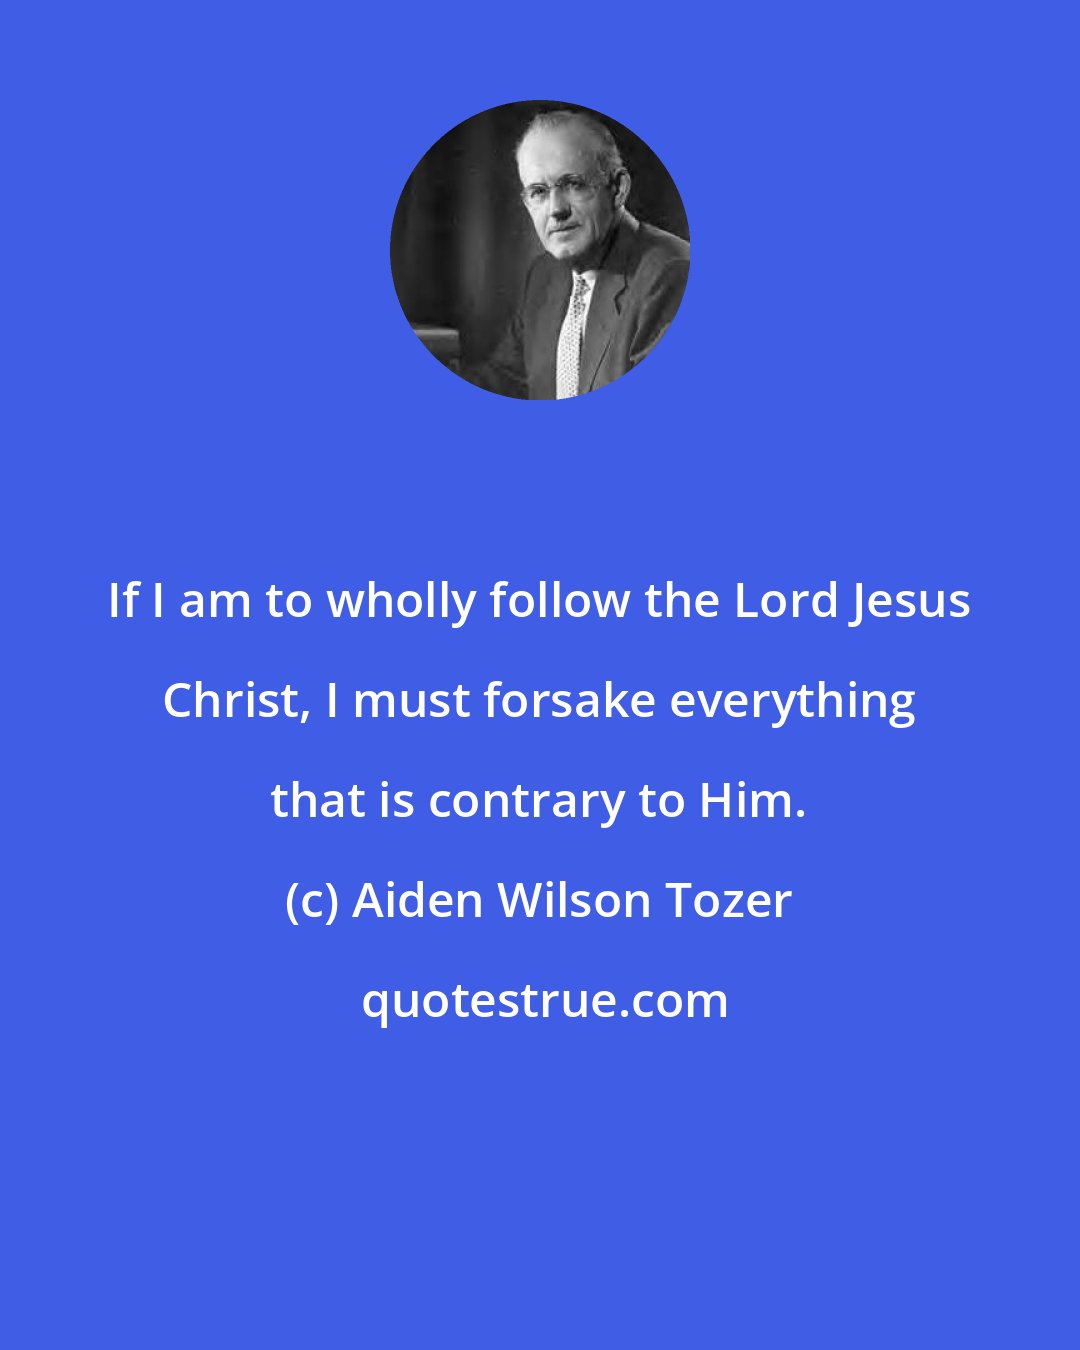 Aiden Wilson Tozer: If I am to wholly follow the Lord Jesus Christ, I must forsake everything that is contrary to Him.